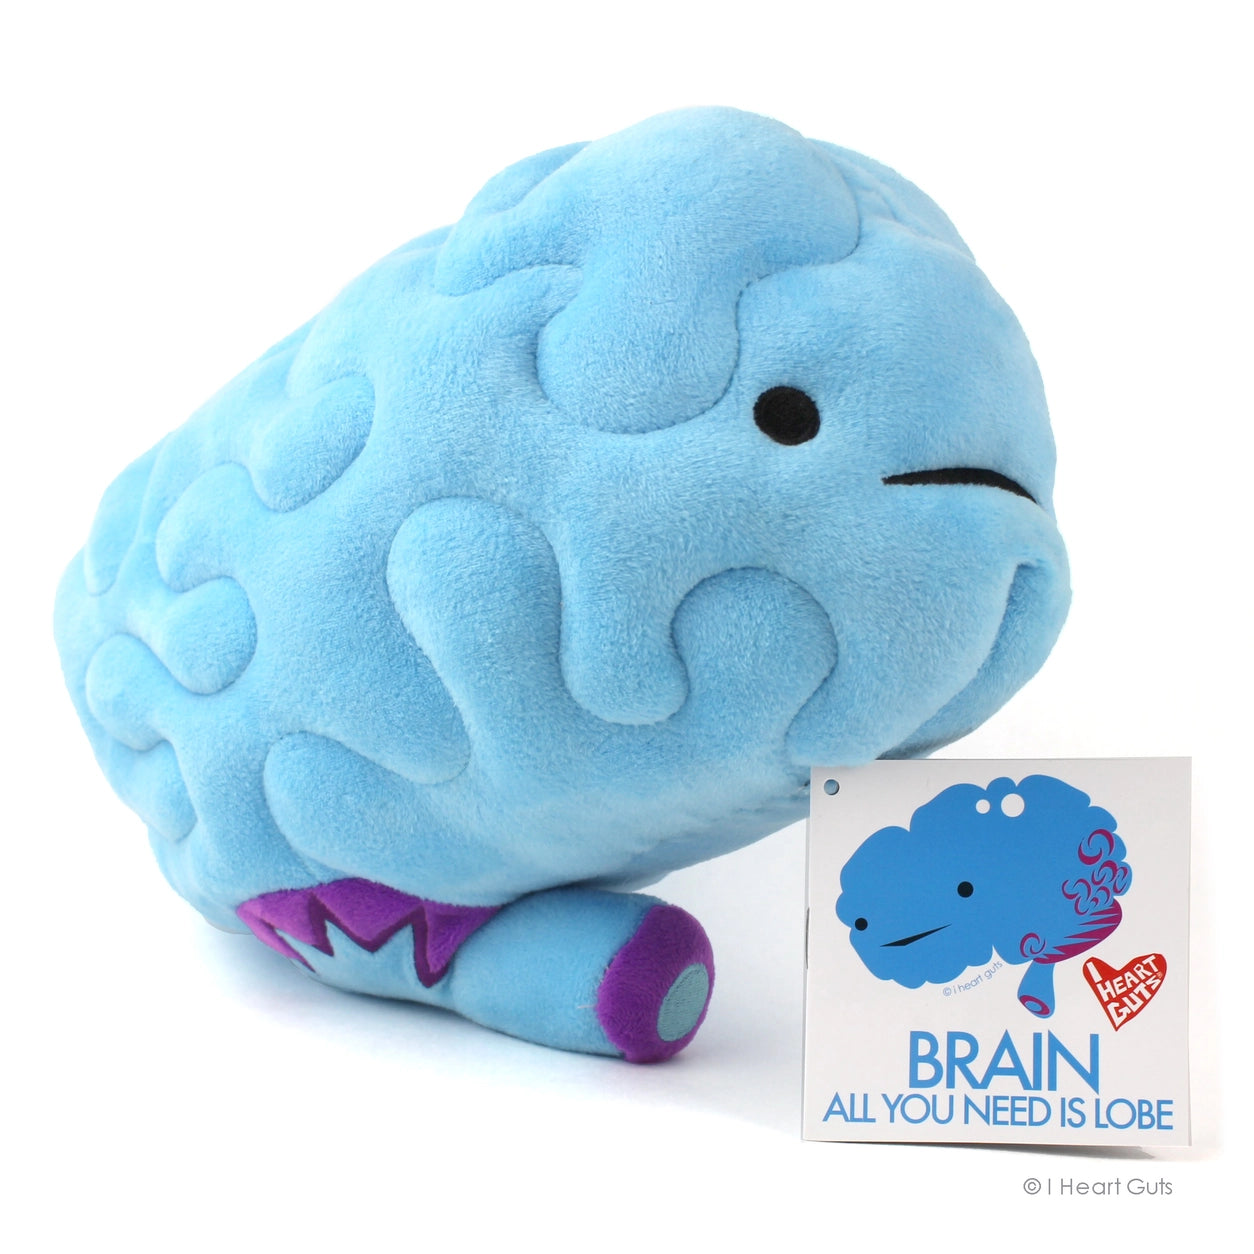 plushie brain - All you need is lobe